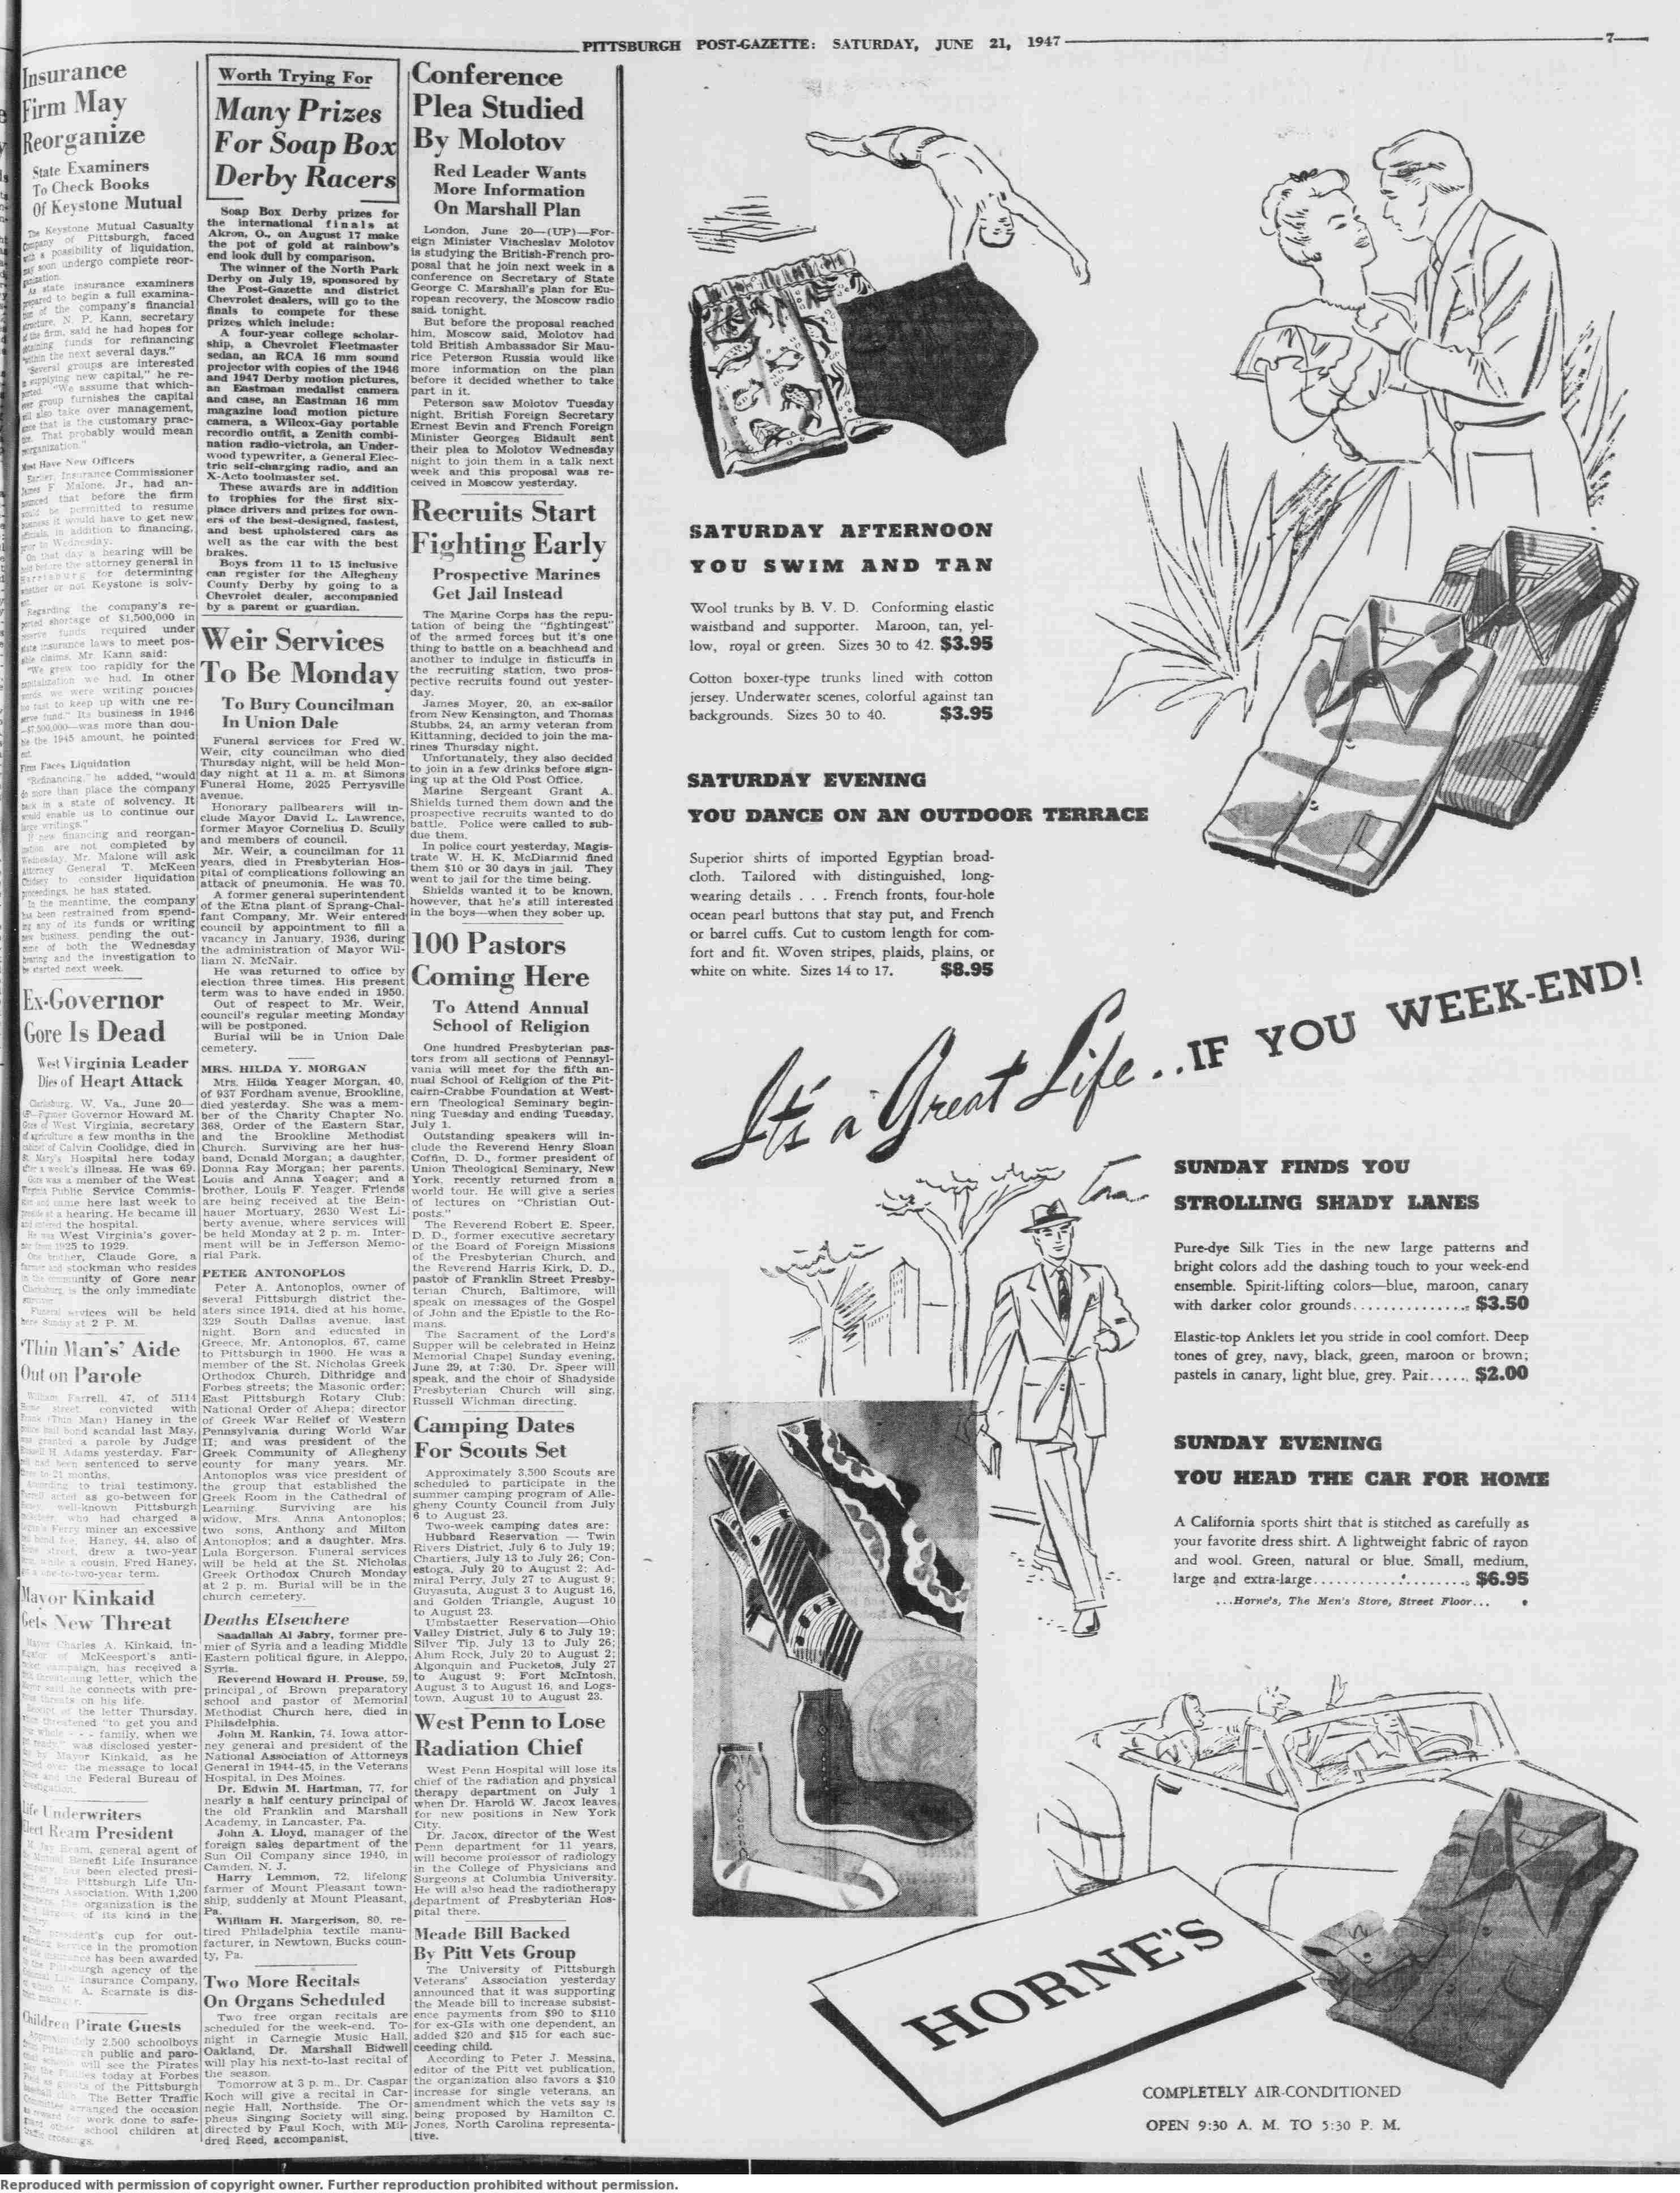 June_21,_1947_(Page_7_of_34)